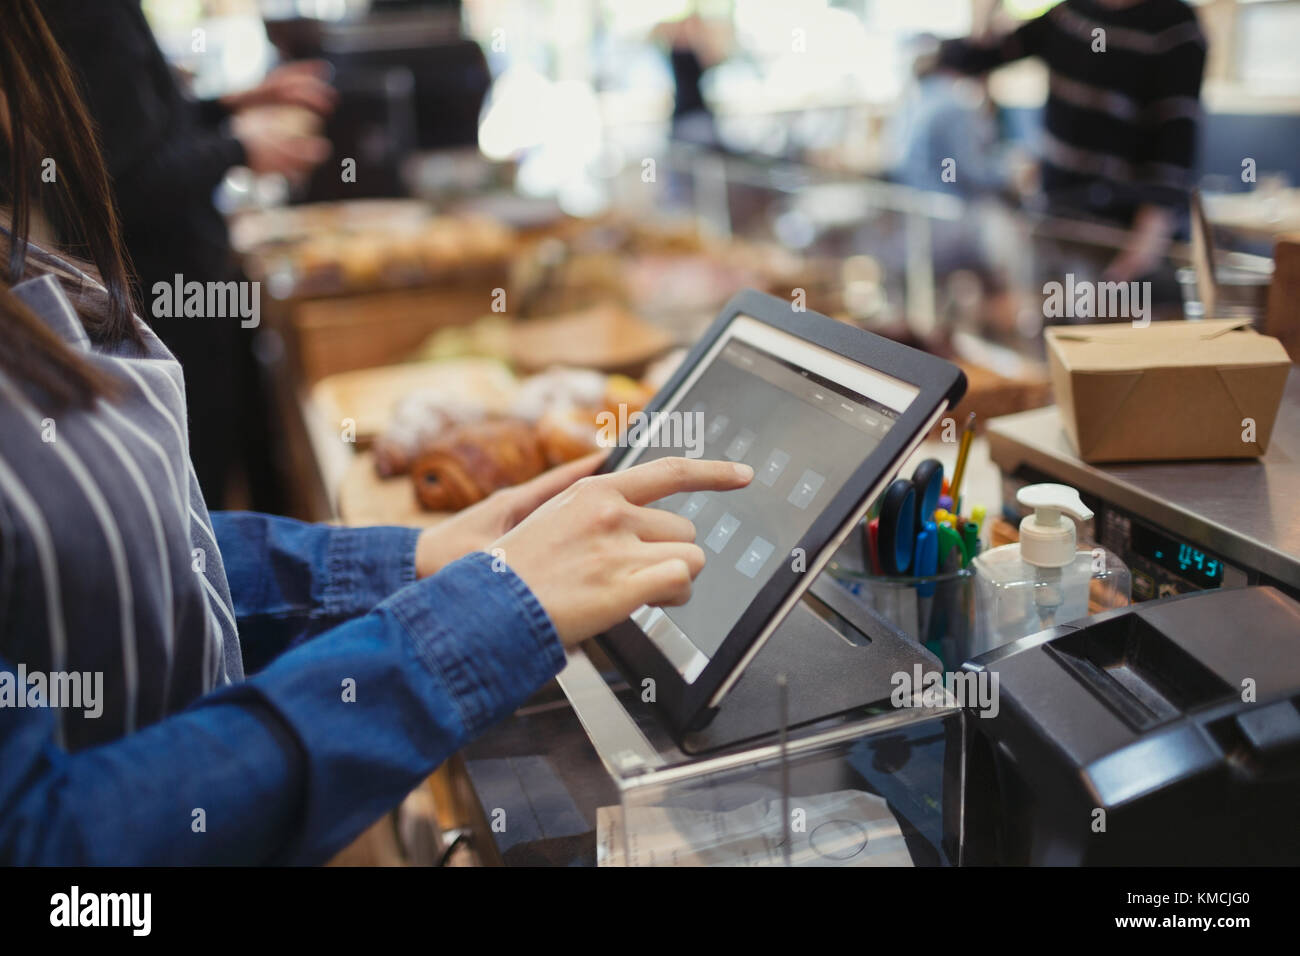 Cashier using touch screen cash register in cafe Stock Photo